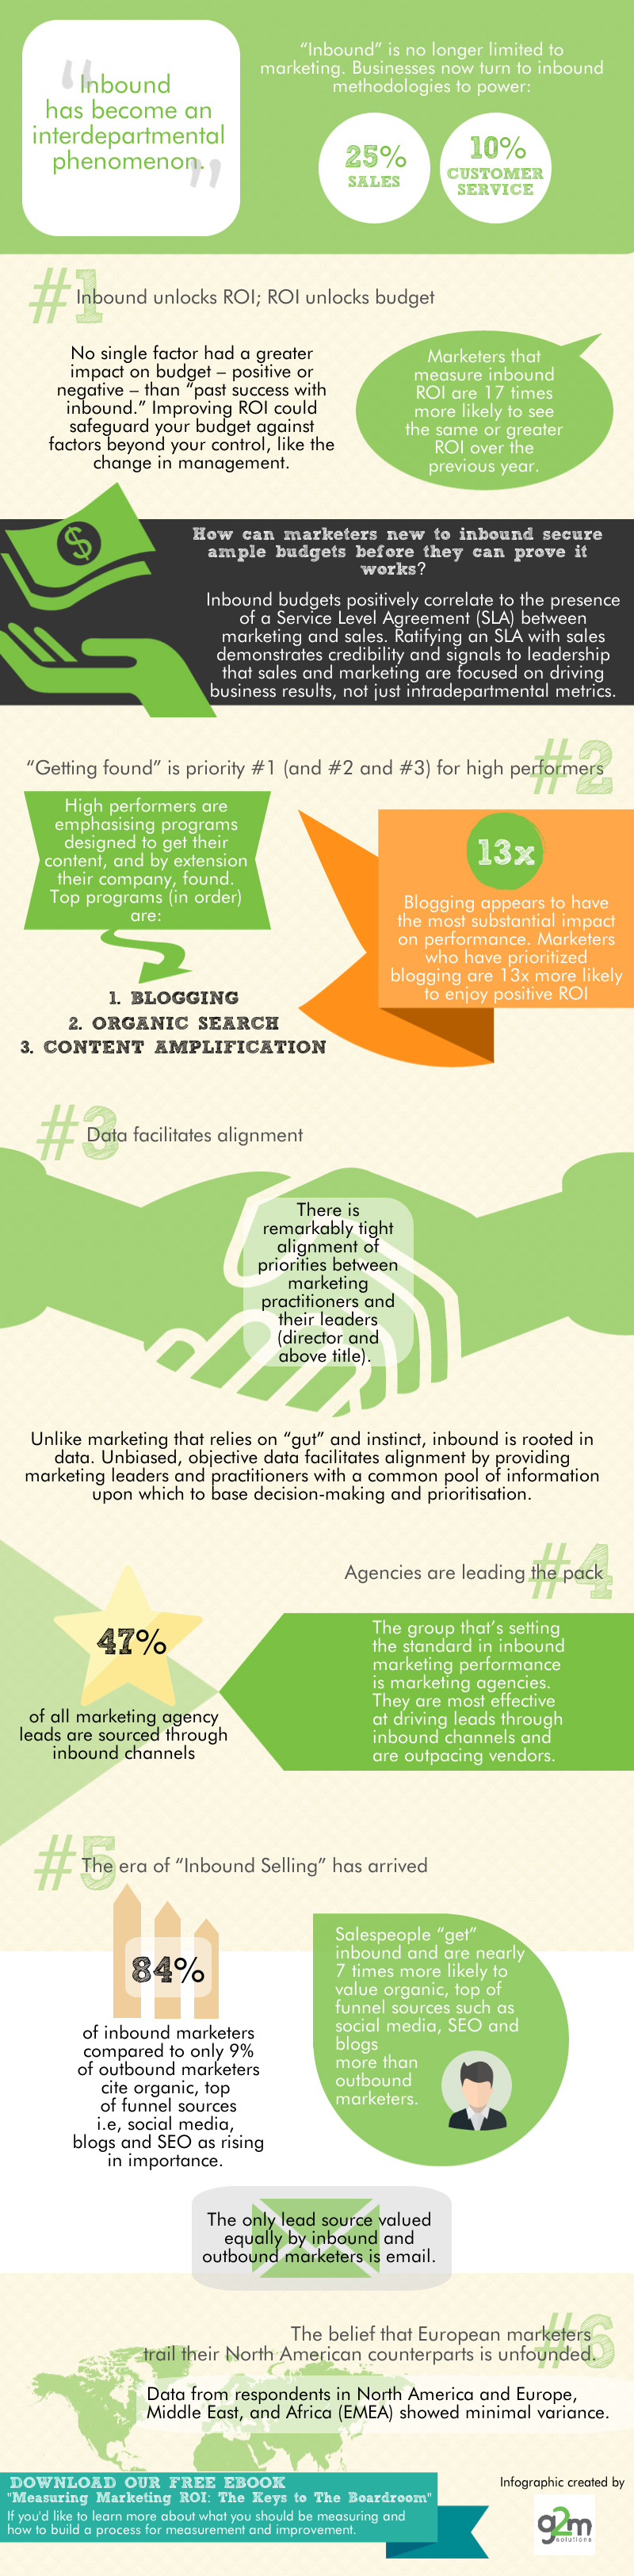 State_of_Inbound_2014_infographic